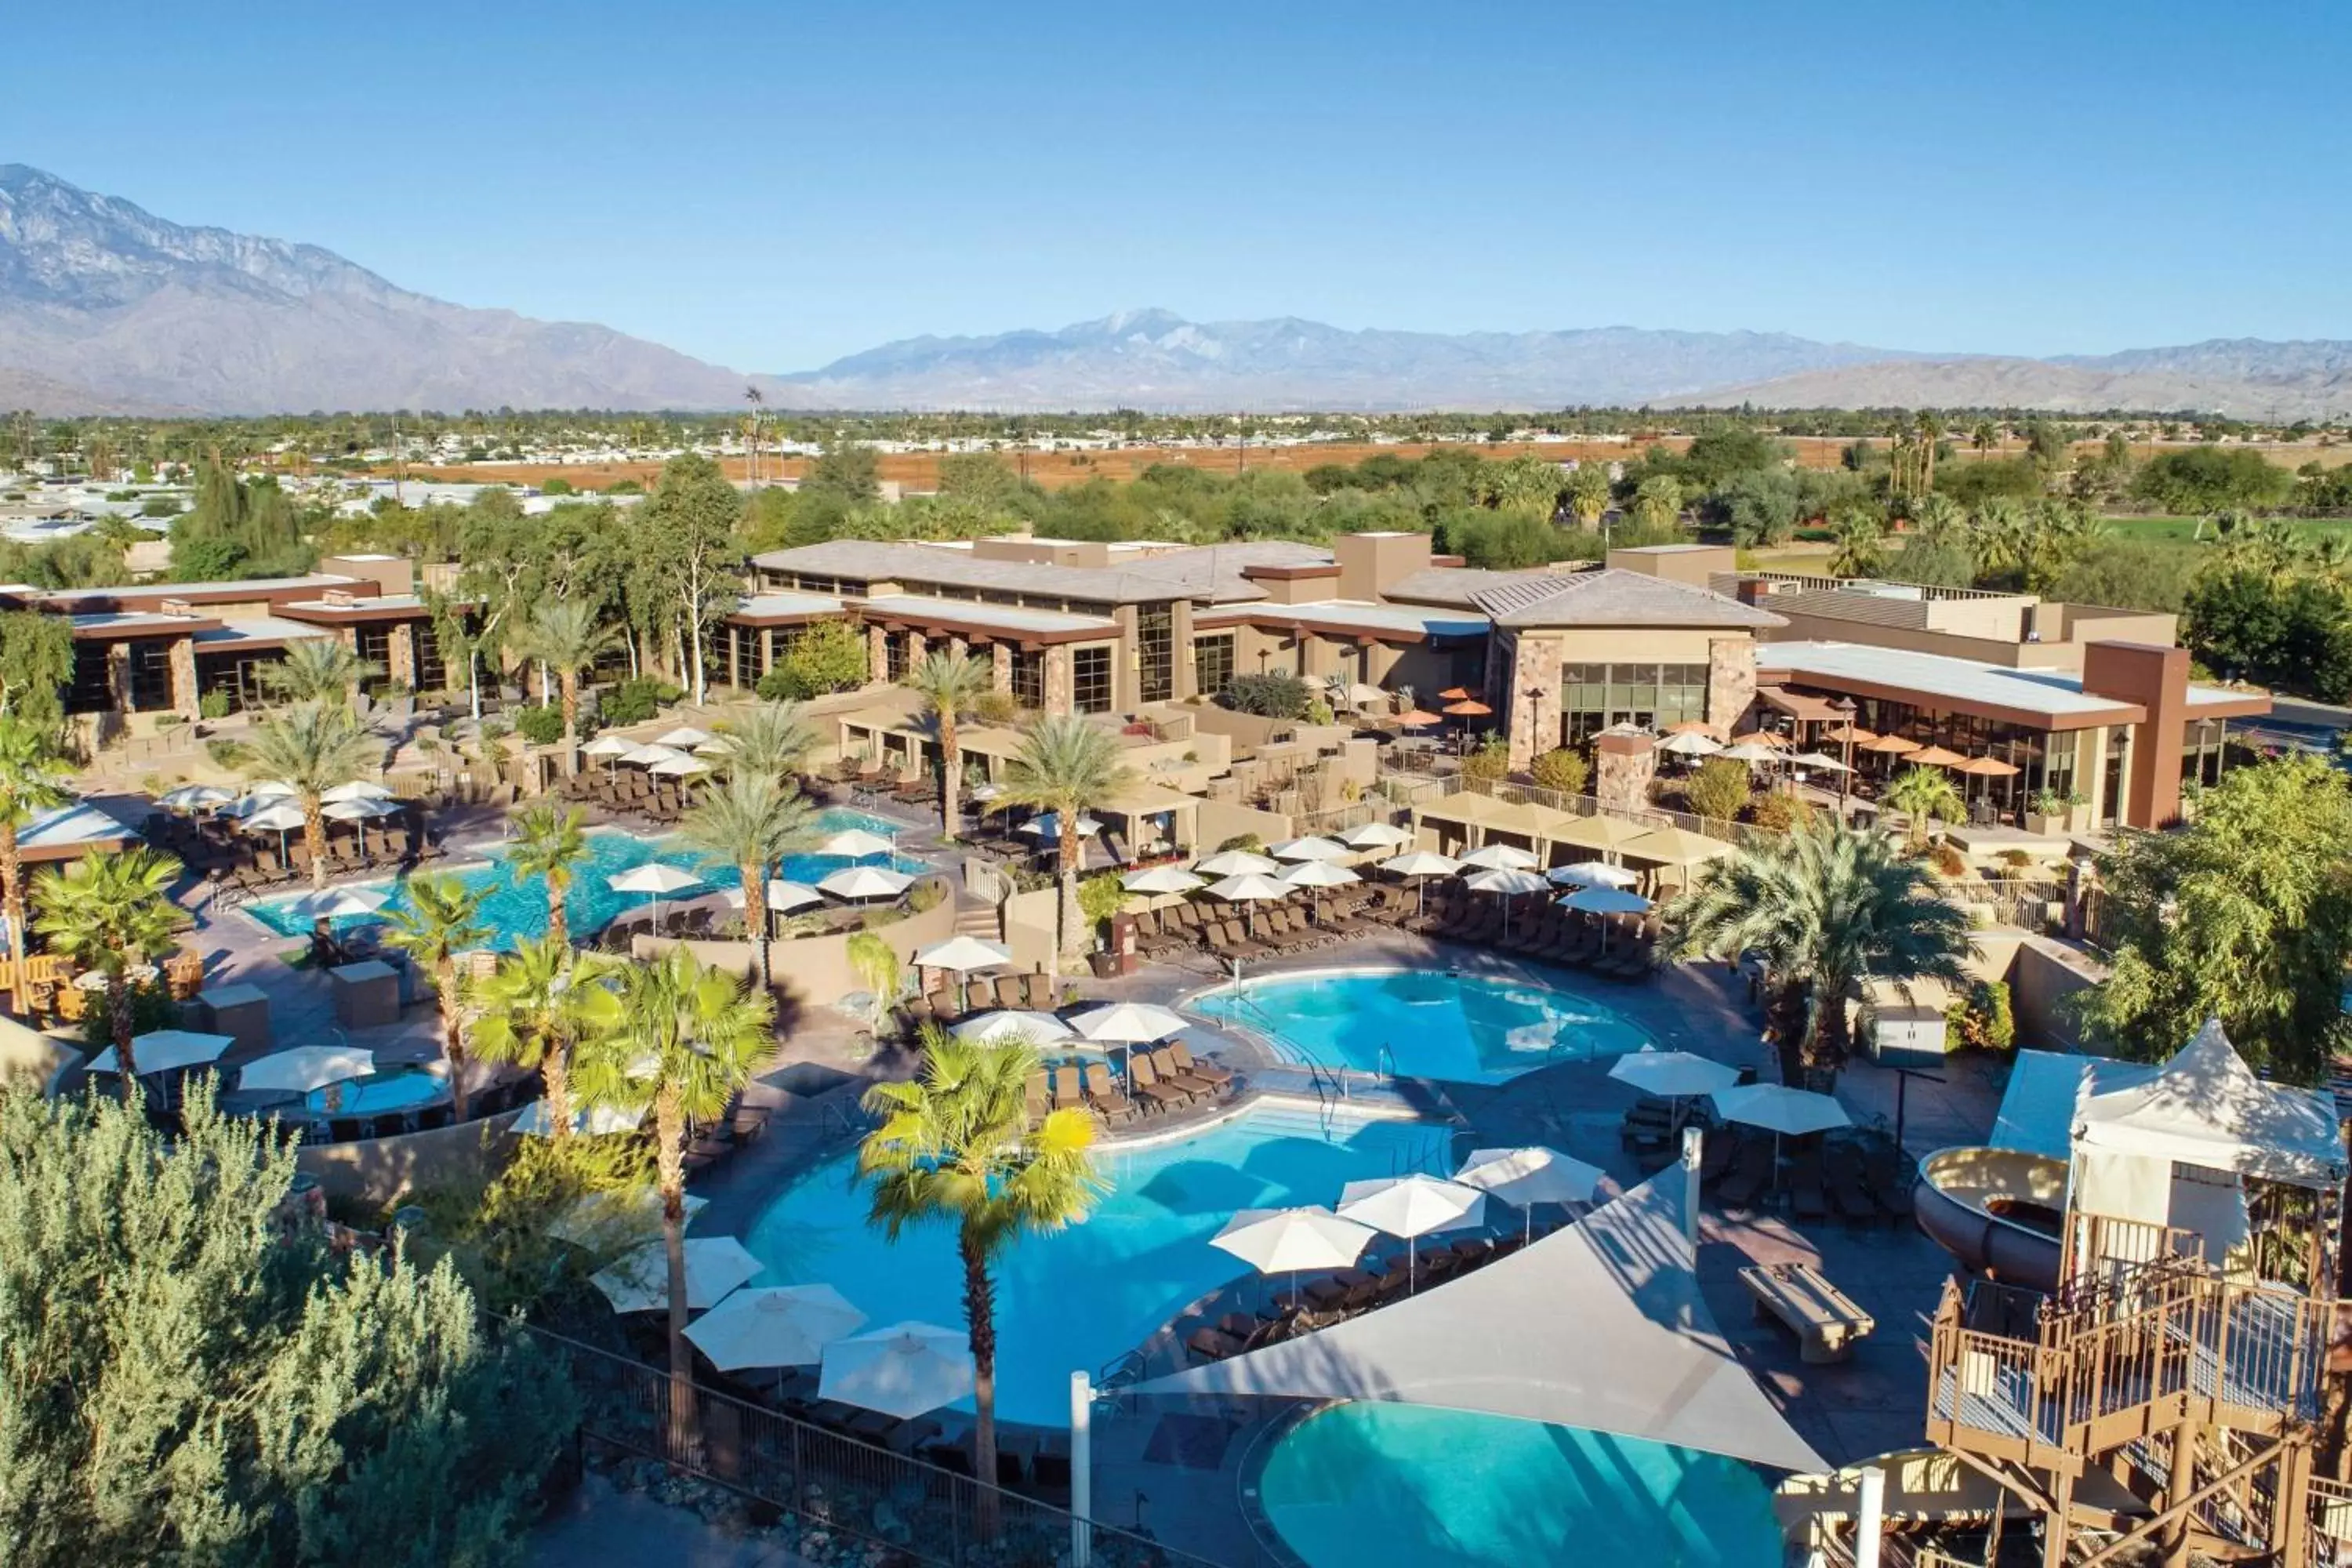 Property building, Pool View in The Westin Desert Willow Villas, Palm Desert